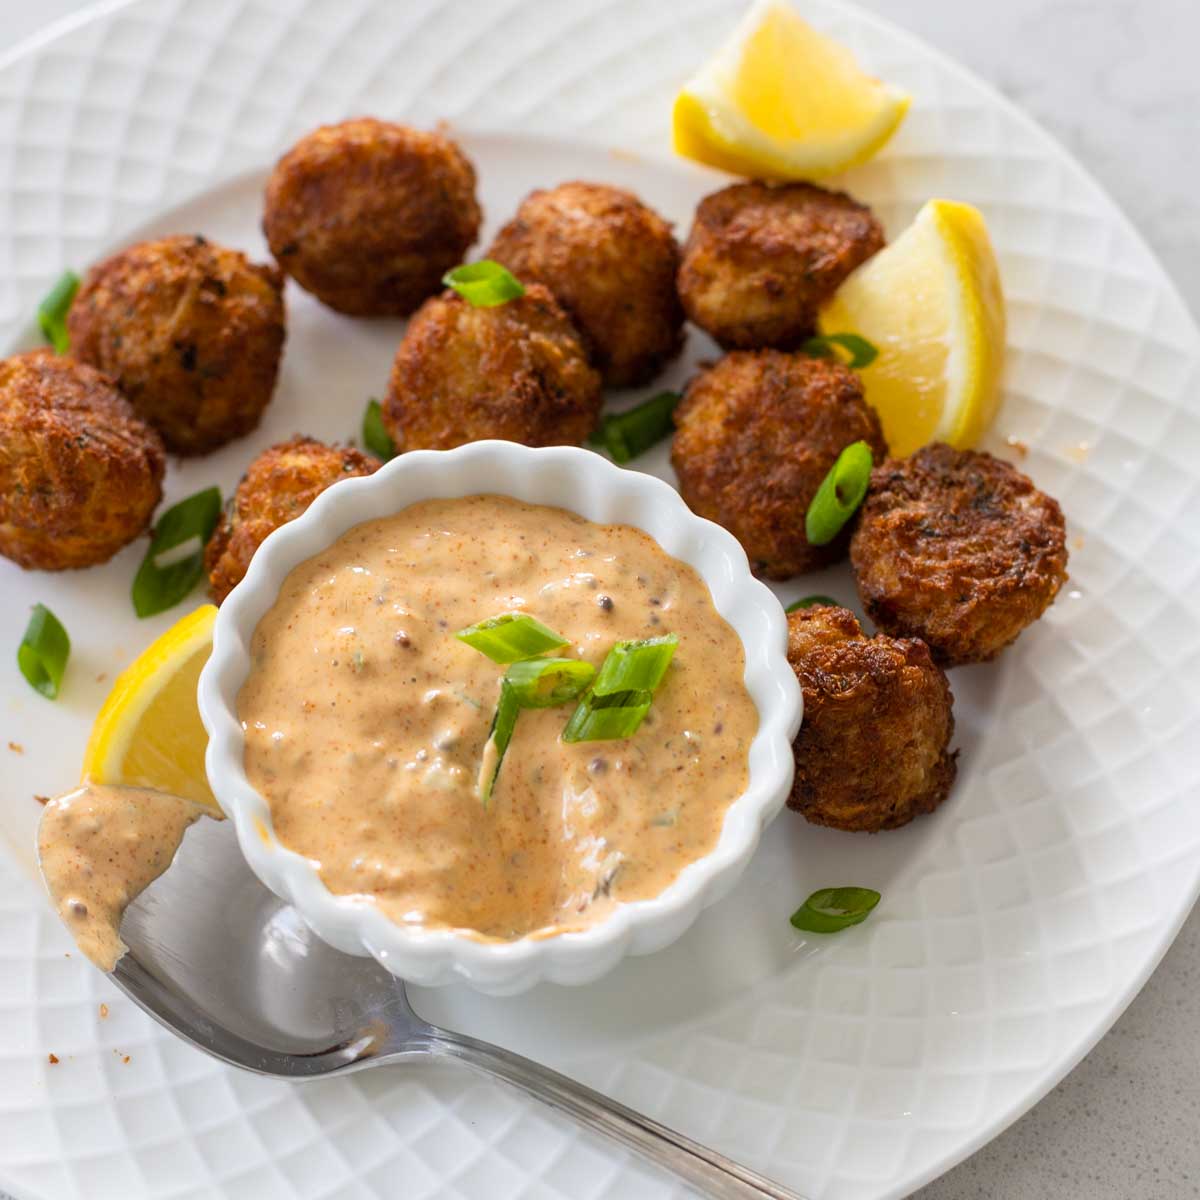 The remoulade sauce is on a plate with mini crab cakes and a spoon. Lemon wedges are scattered around and green onions sprinkled on top.